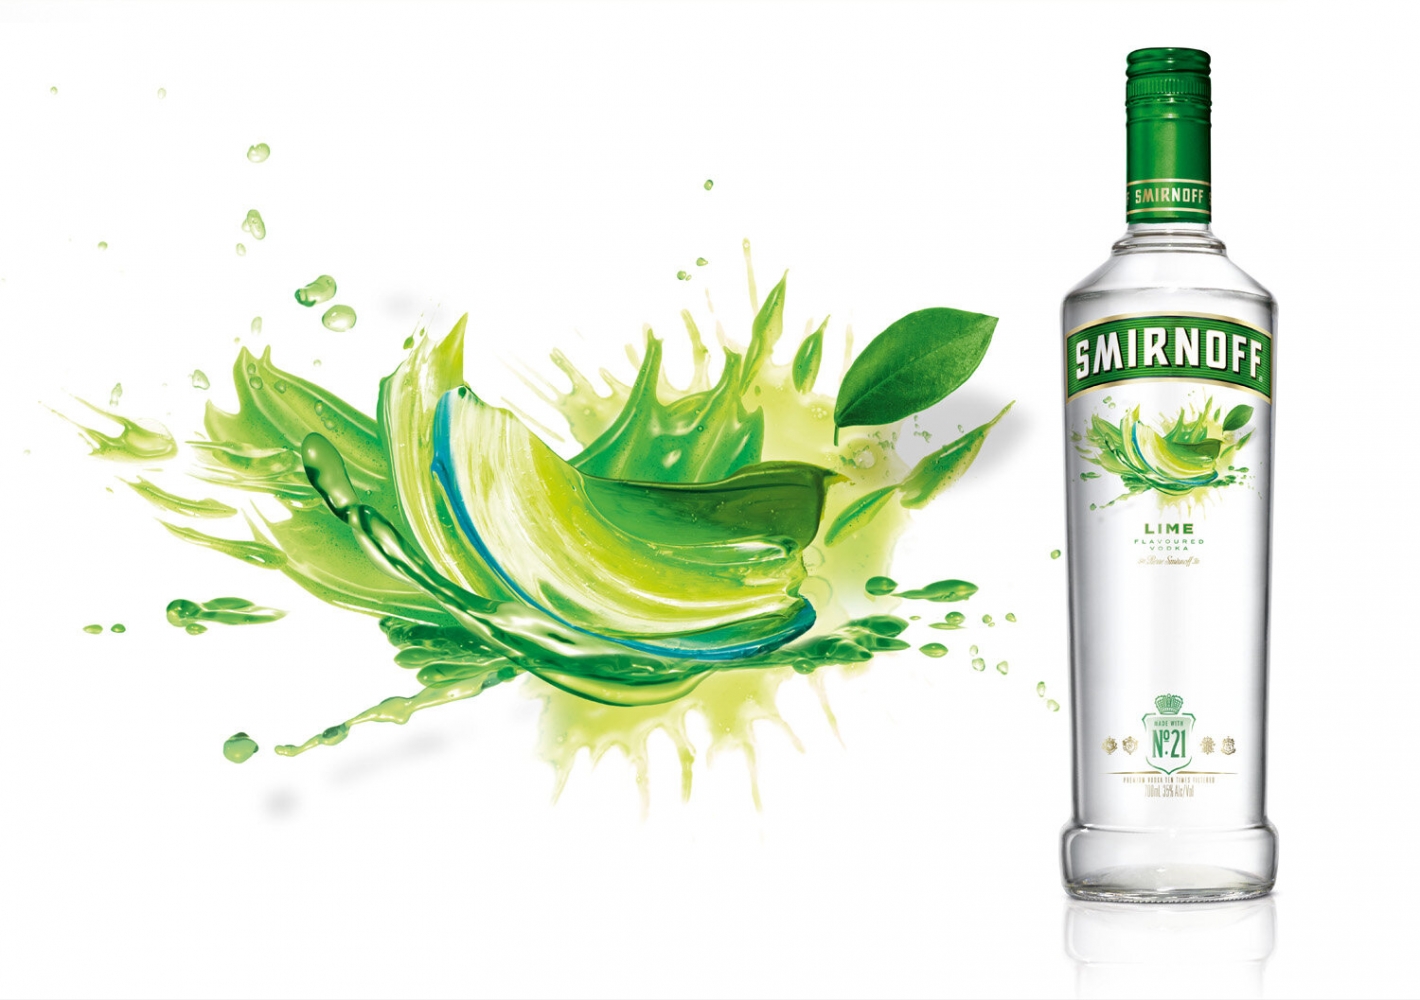 Smirnoff-lime-vodka-abstract Dominic Davies - Photography - London